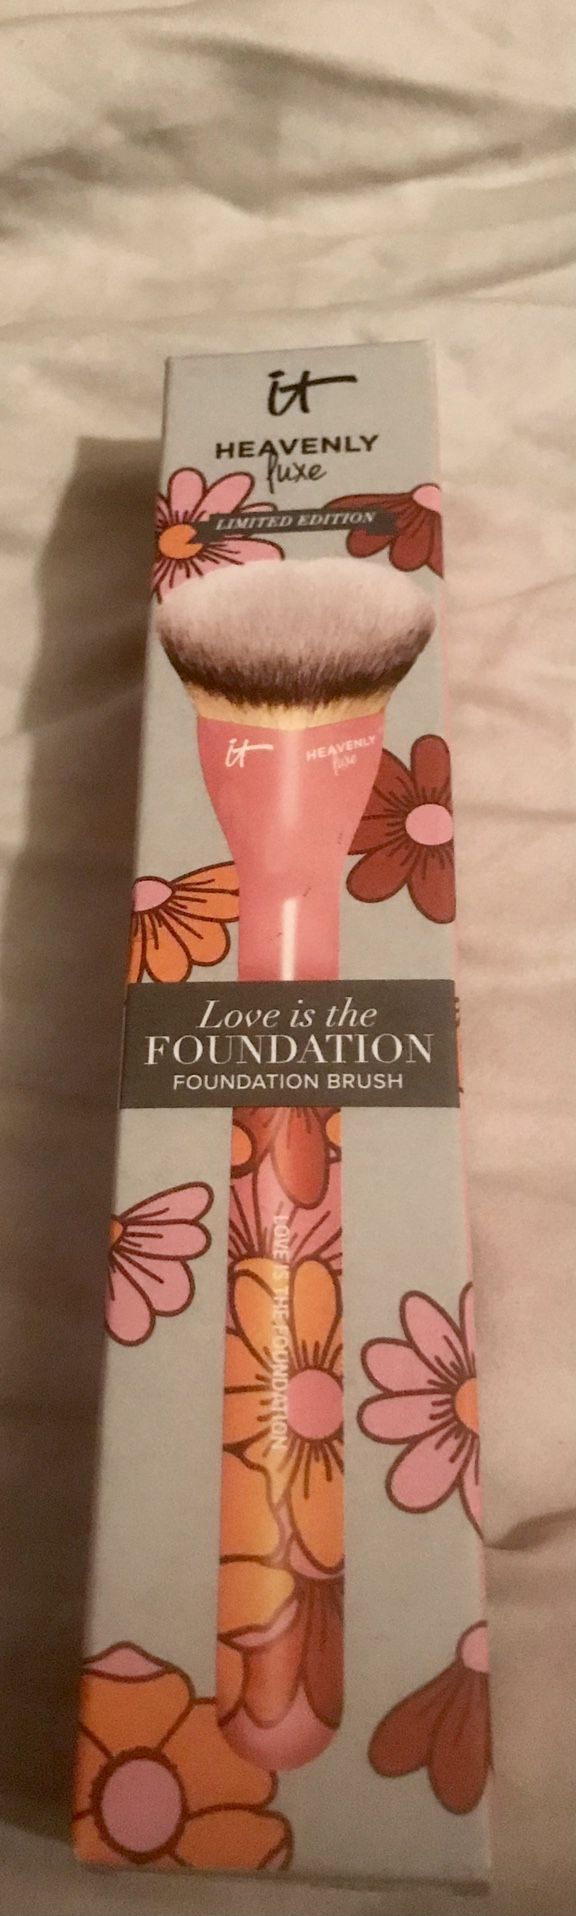 2 IT HEAVENLY LUXE FOUNDATION BRUSH